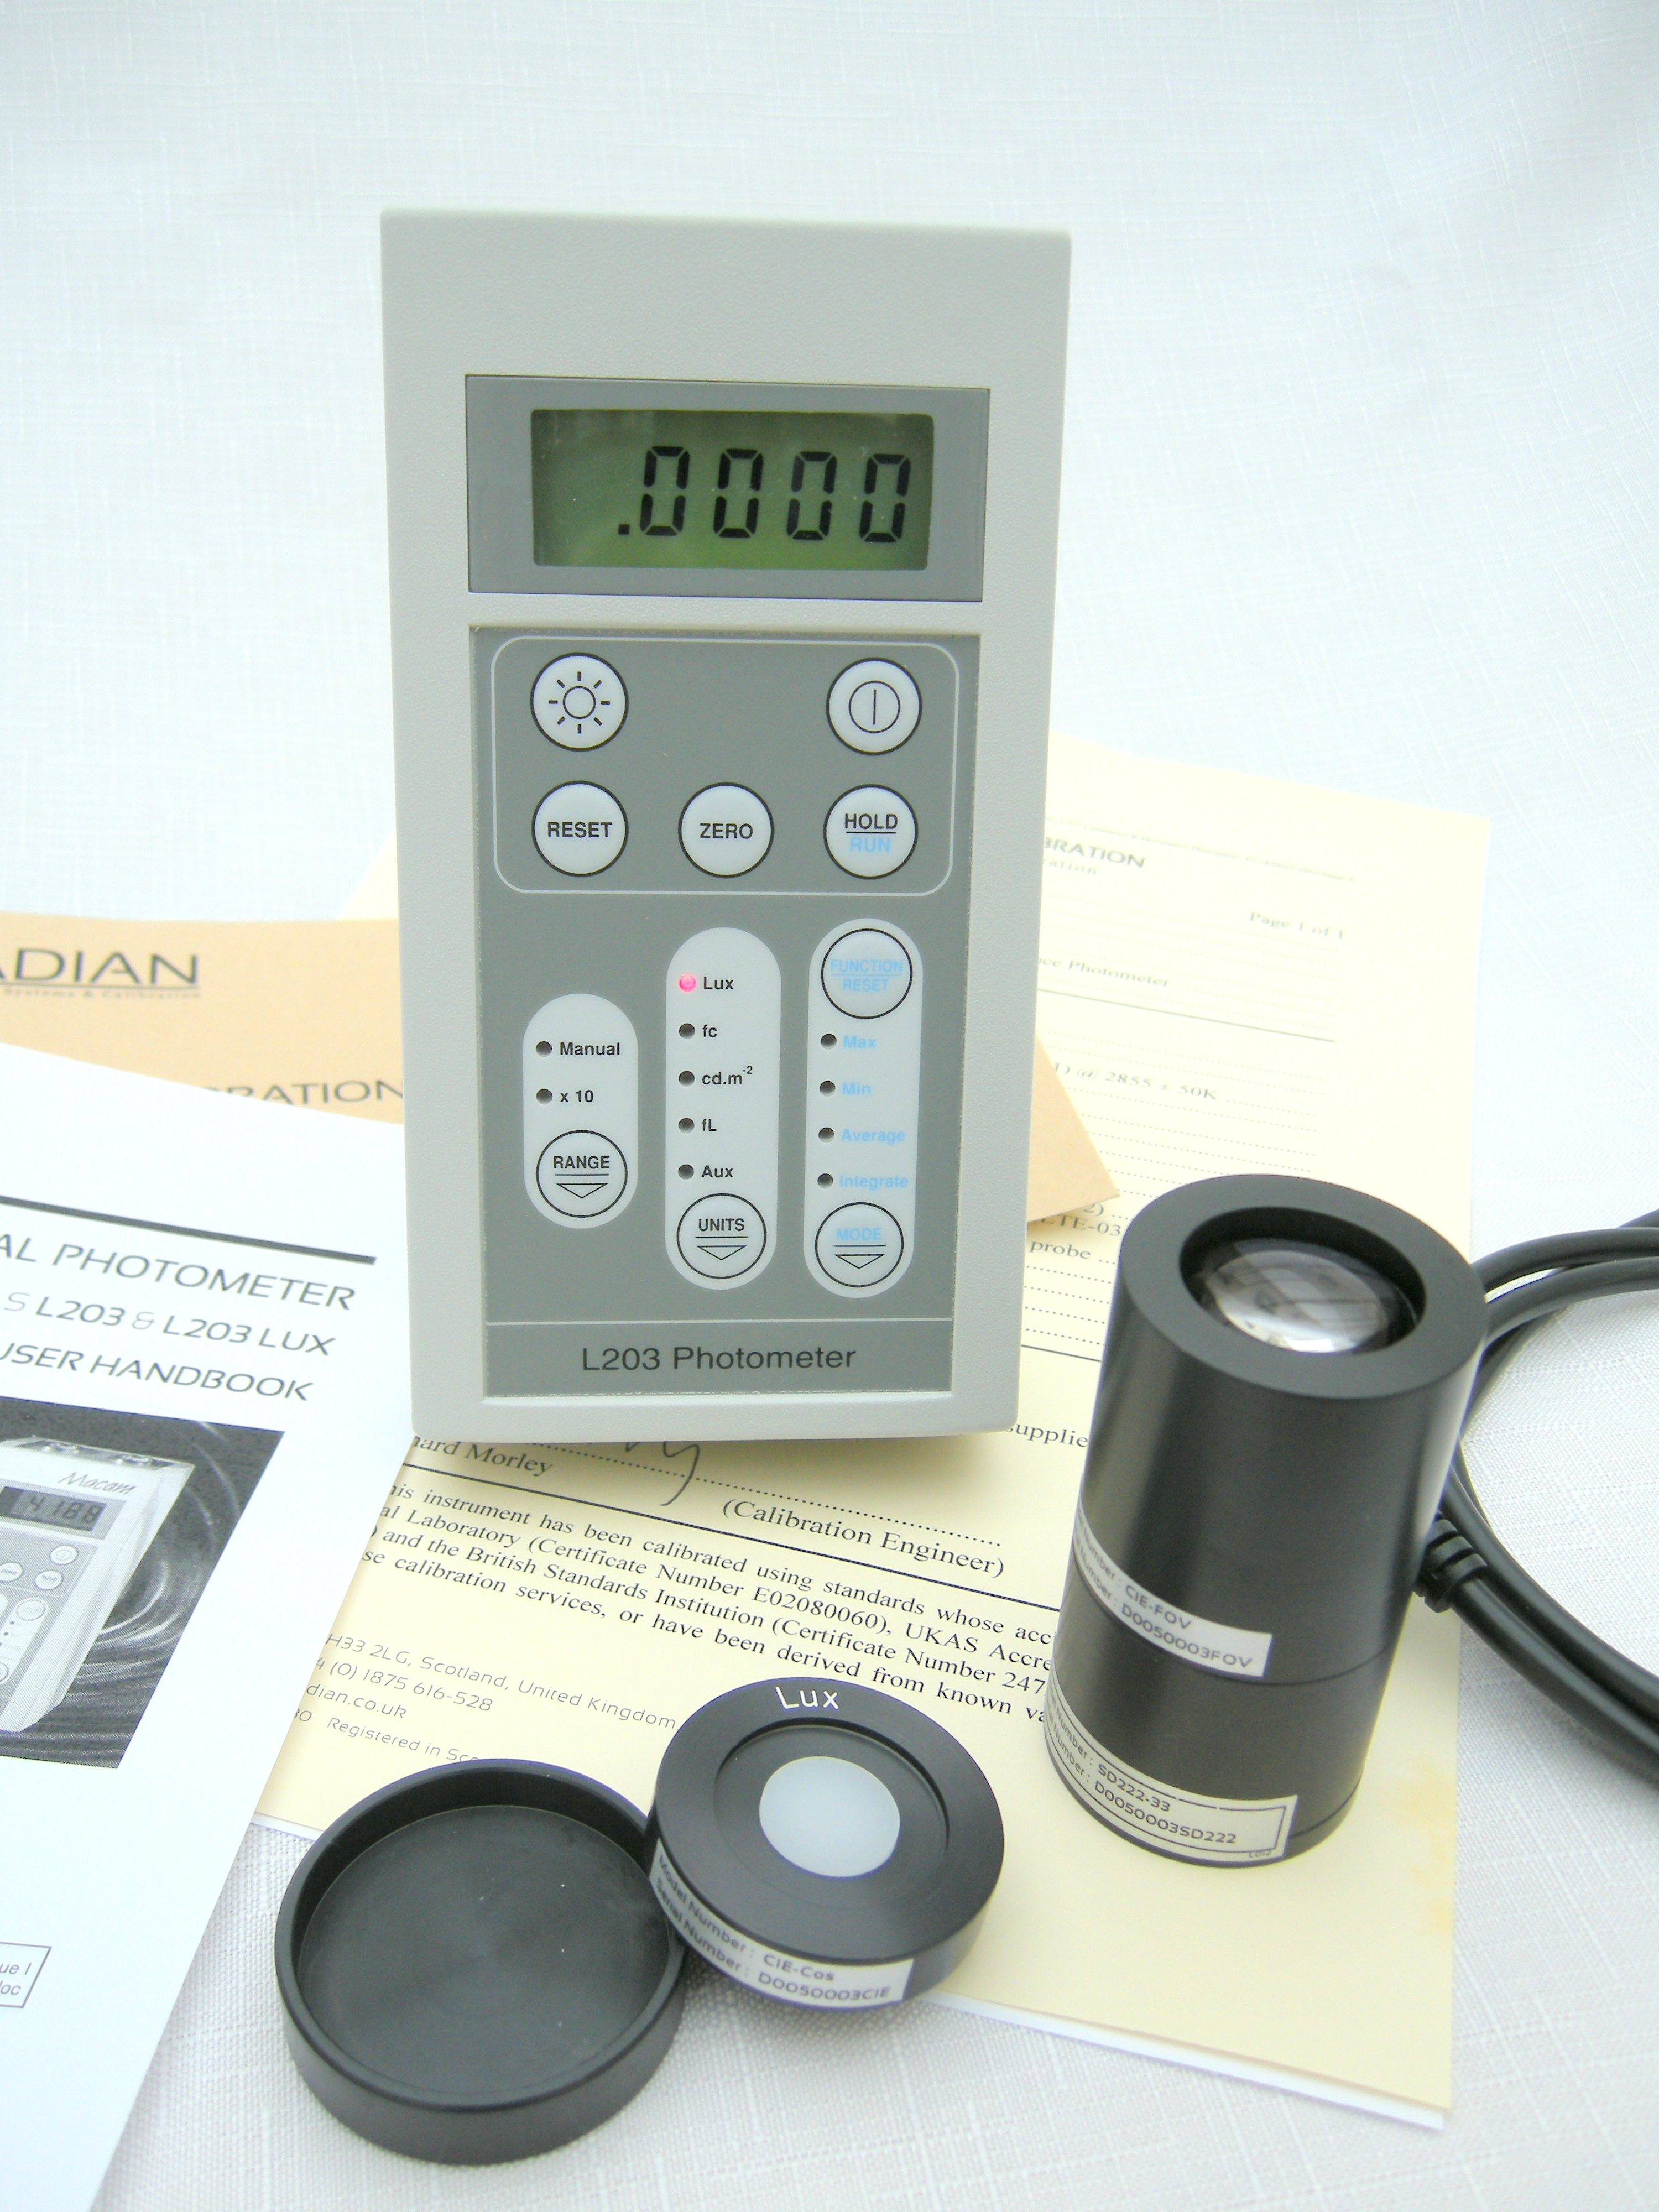 New Irradian L203 photometer brochure is available